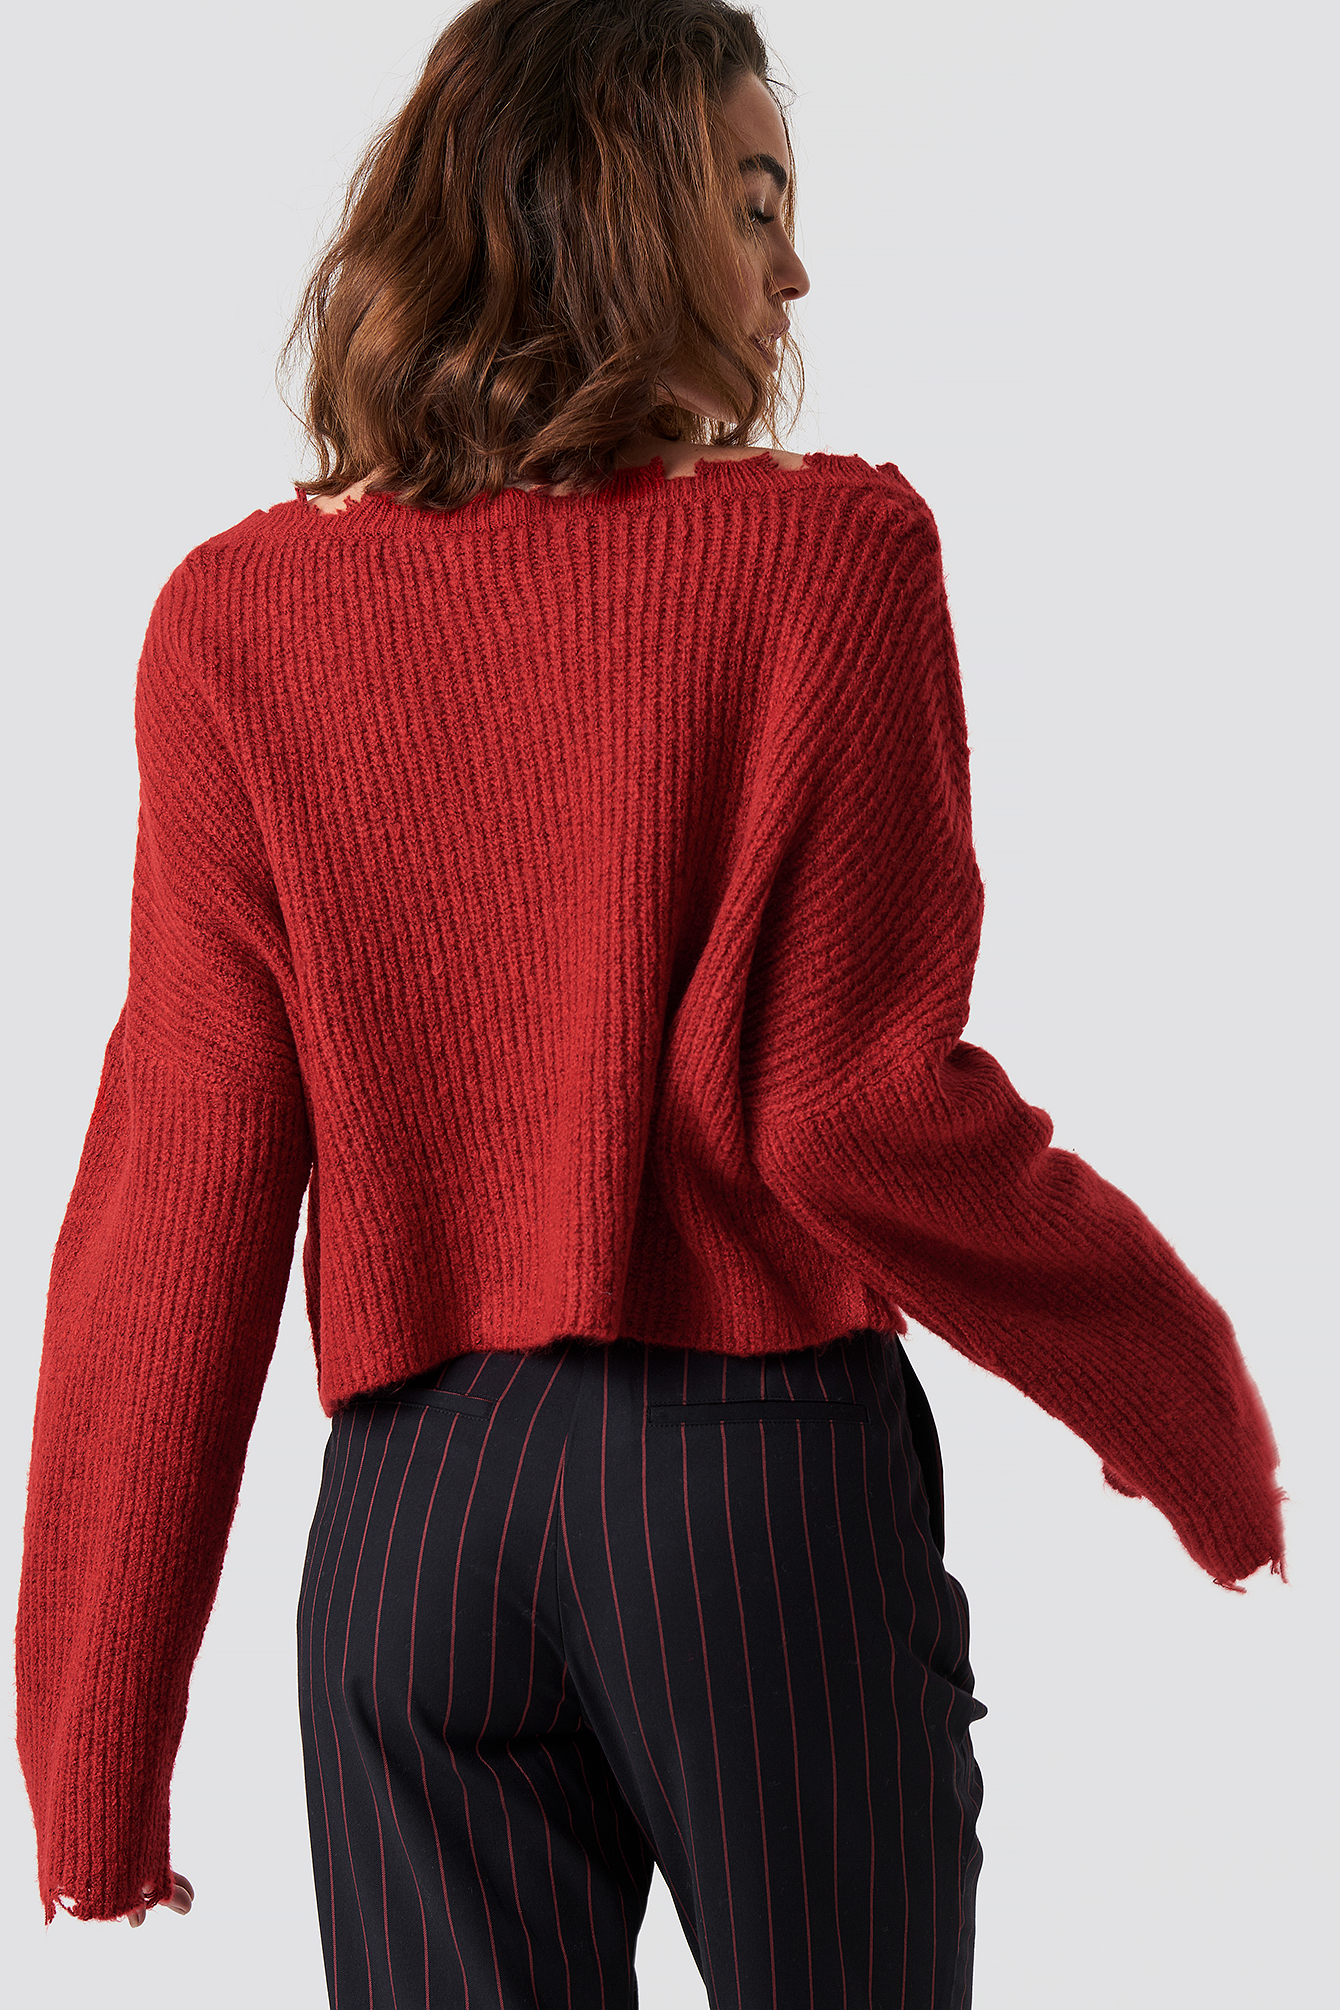 Red Slouchy Knit